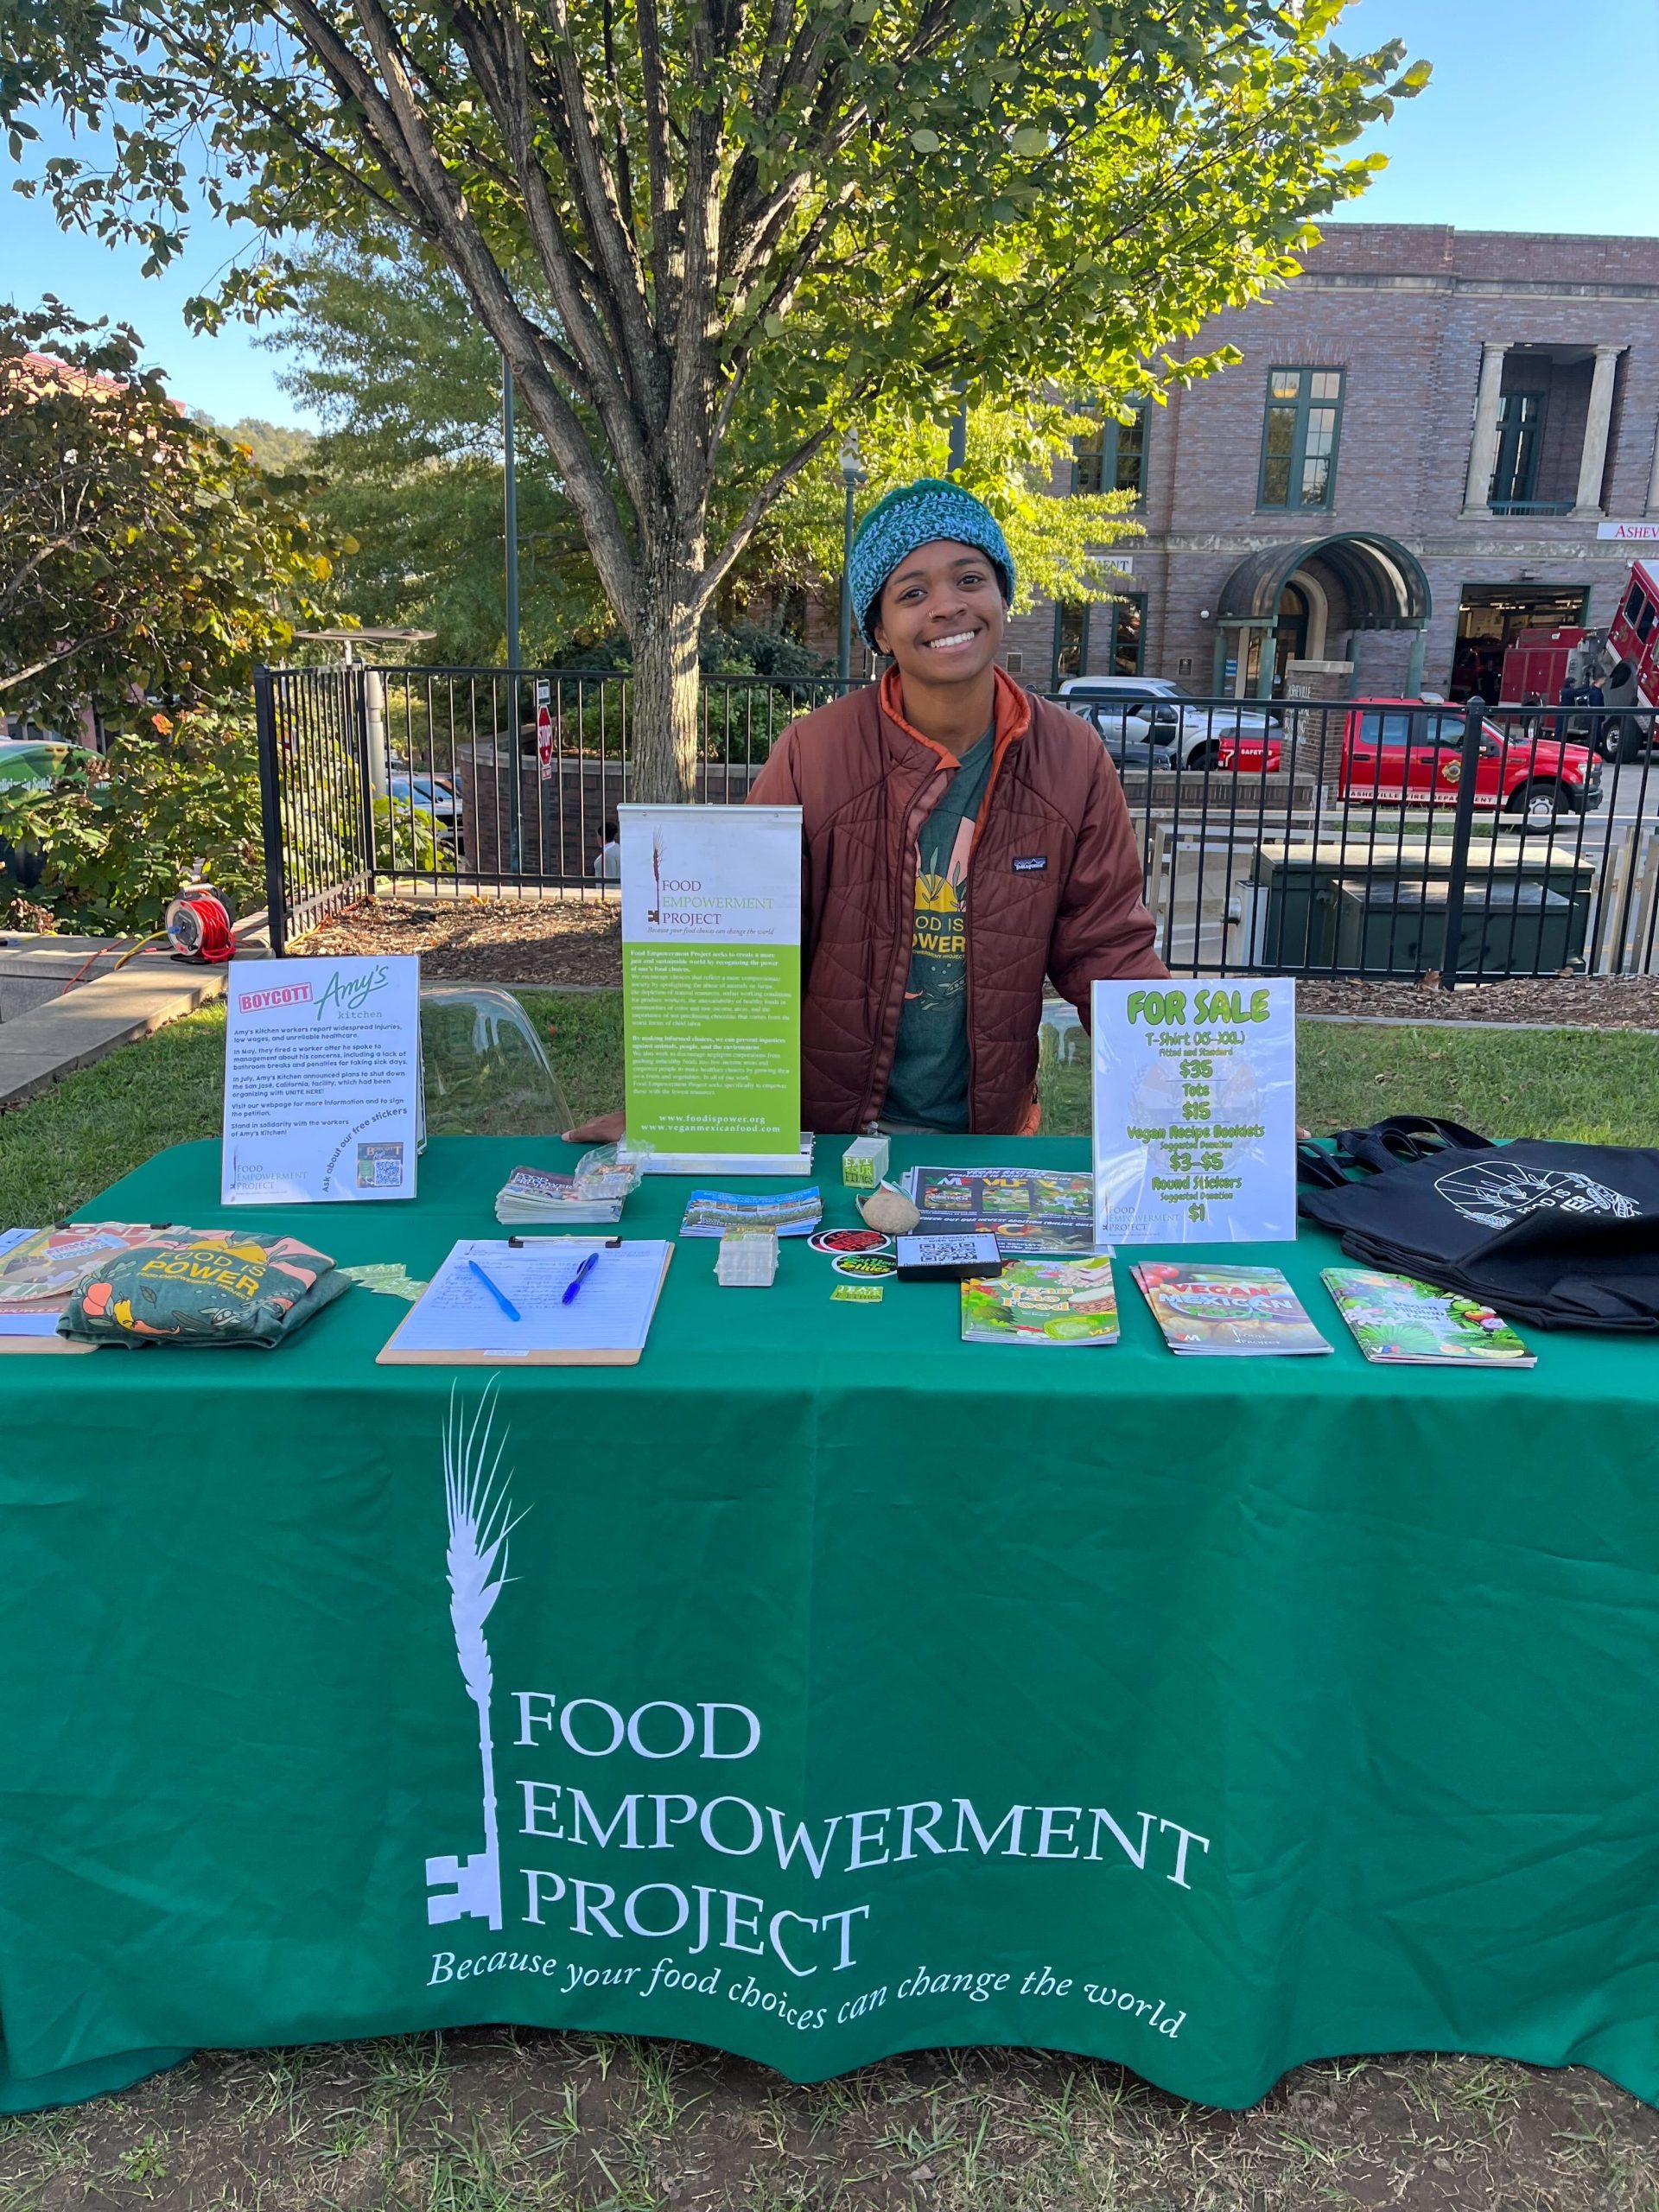 Food Empowerment Project stand